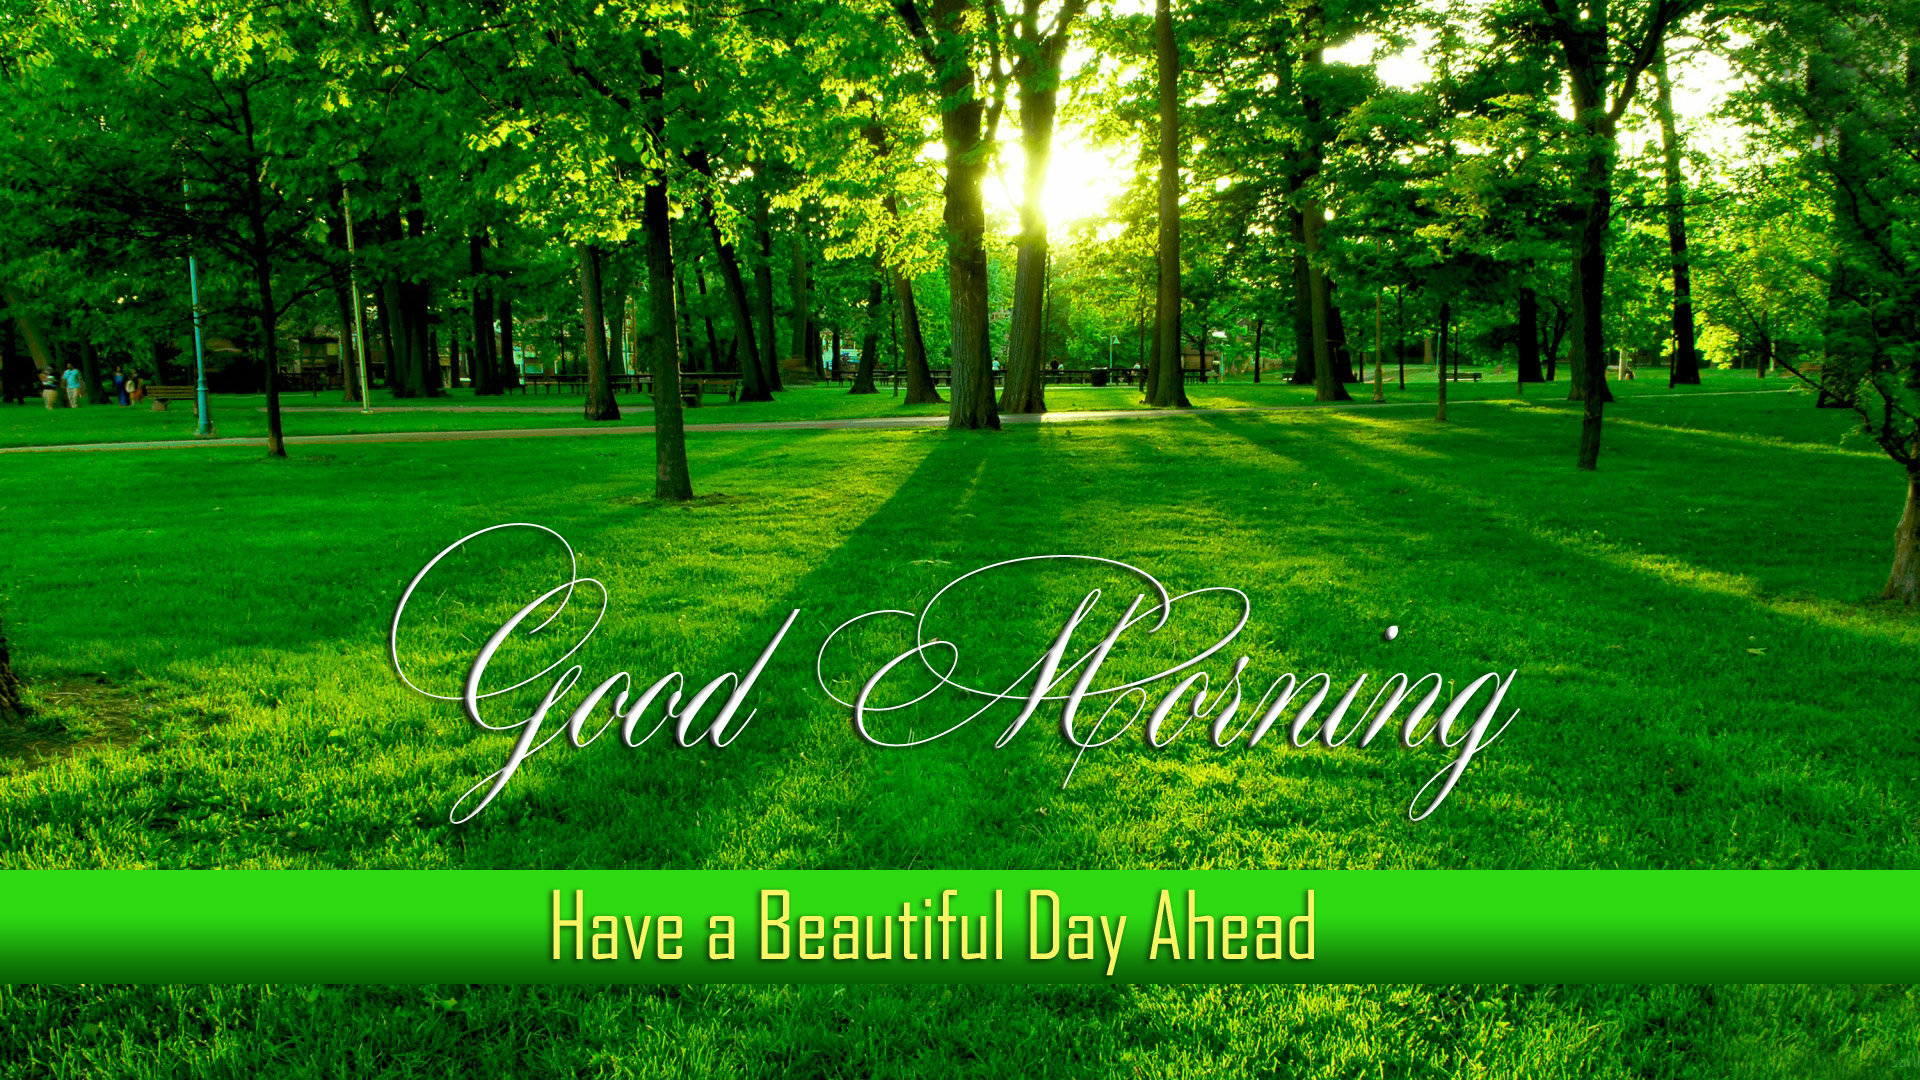 Beautiful Good Morning Wallpaper Submited Image